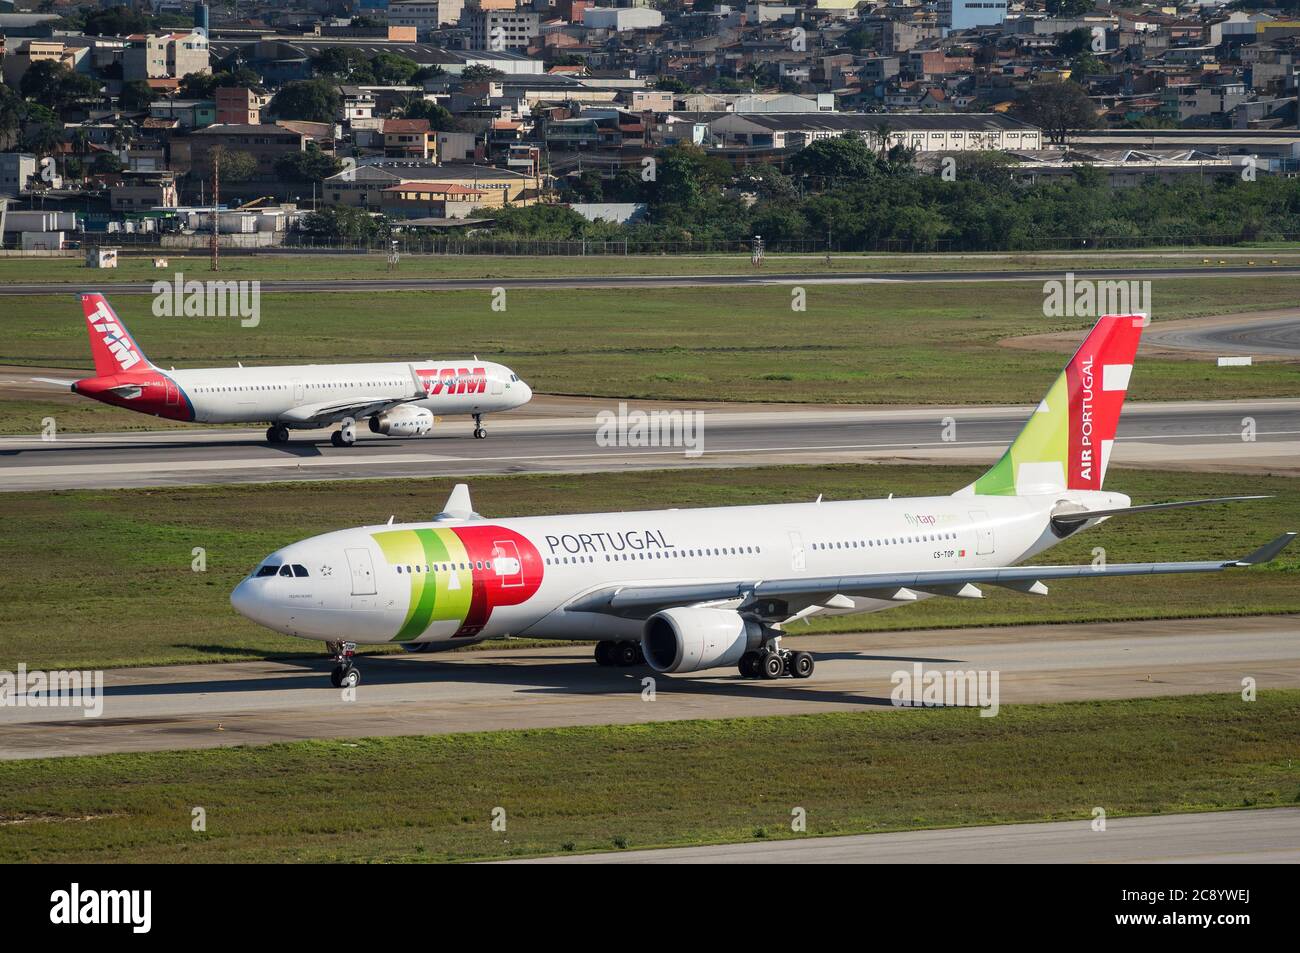 TAP Air Portugal Airbus A330-202 (CS-TOP - 'Pedro Nunes') taxing while another plane is taking off on runway 27R of Sao Paulo/Guarulhos Intl. Airport. Stock Photo